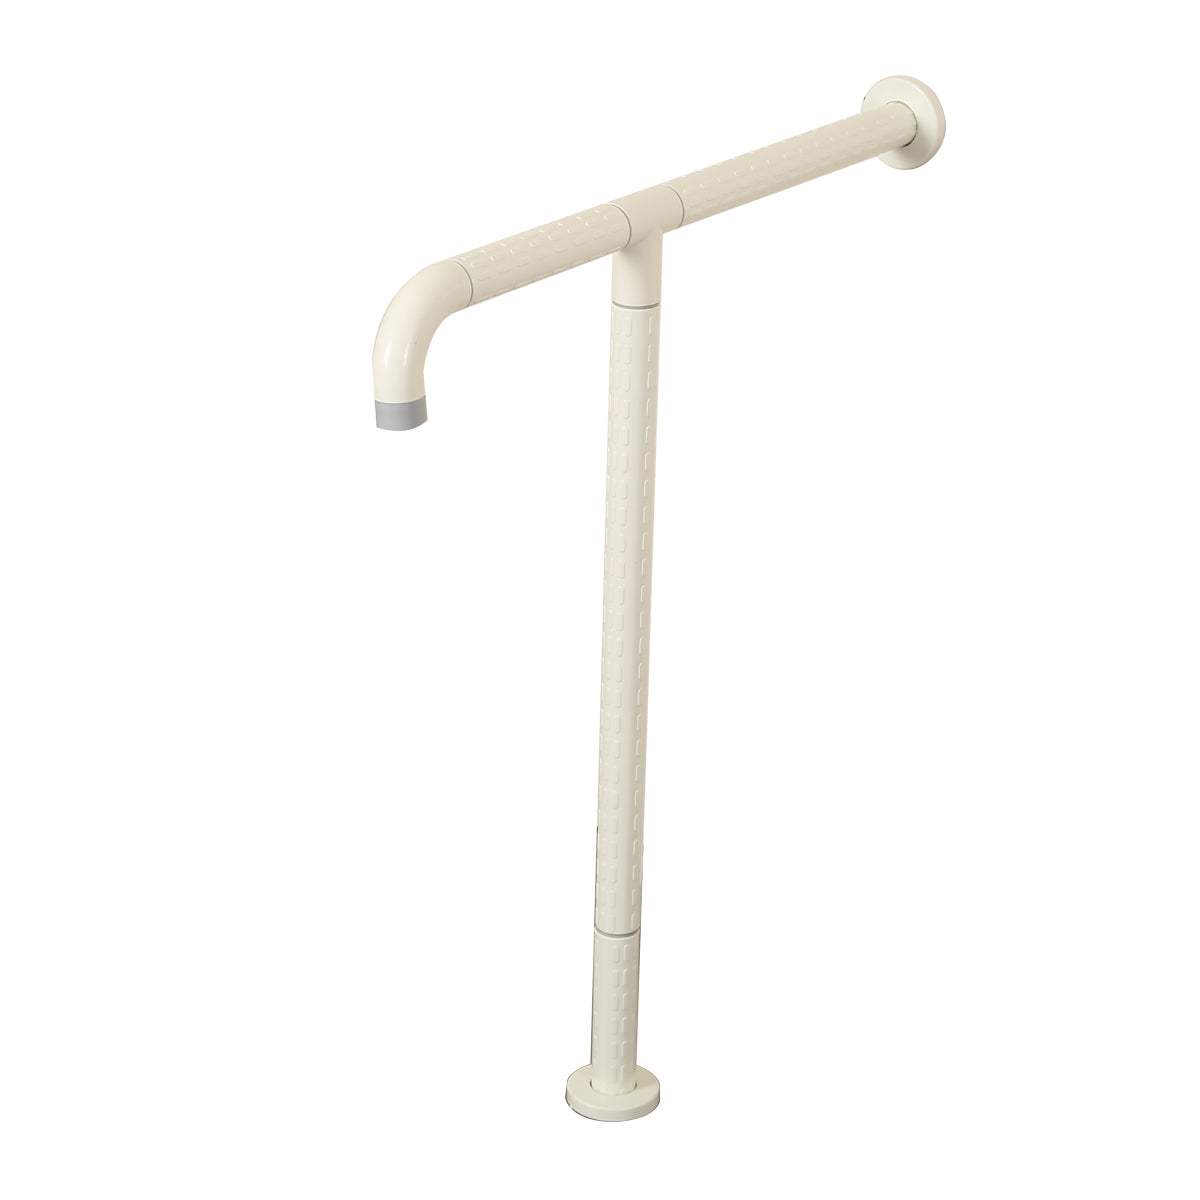 T Shaped Grab Bar With Floor Support